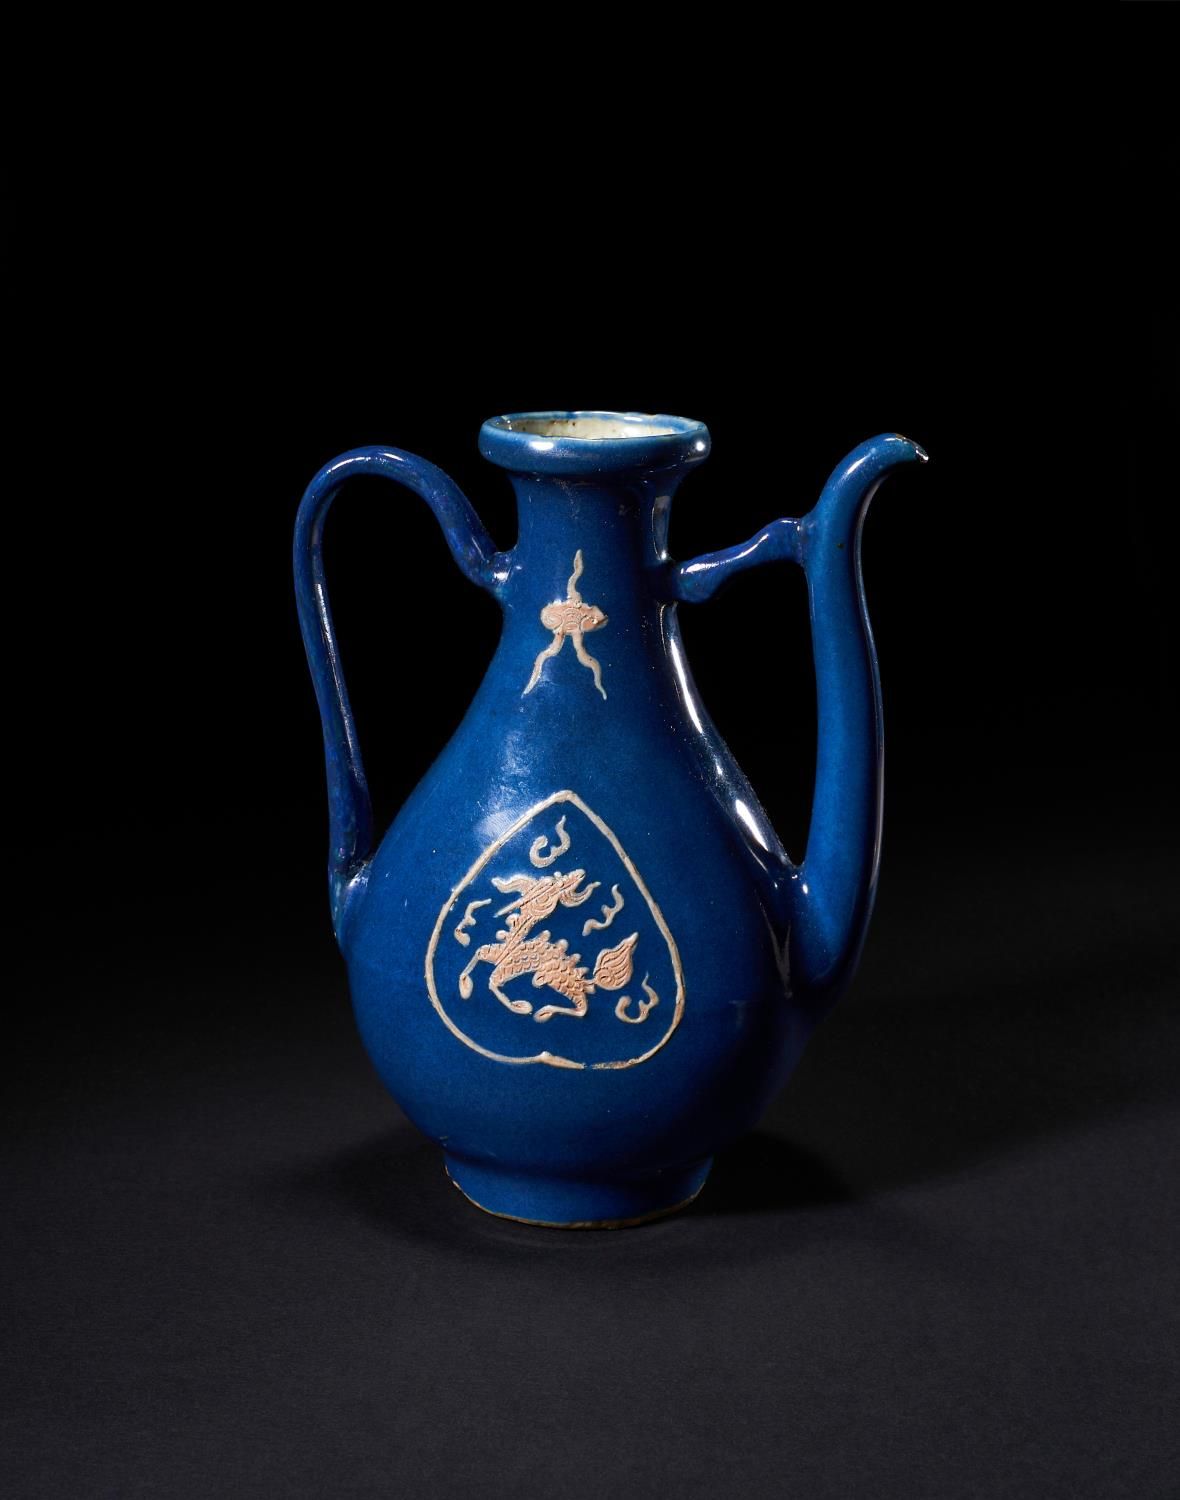 A BLUE-GLAZED AND SLIP-DECORATED EWER LATE MING DYNASTY (1368-1644) 明代晚期（1368-16&hellip;